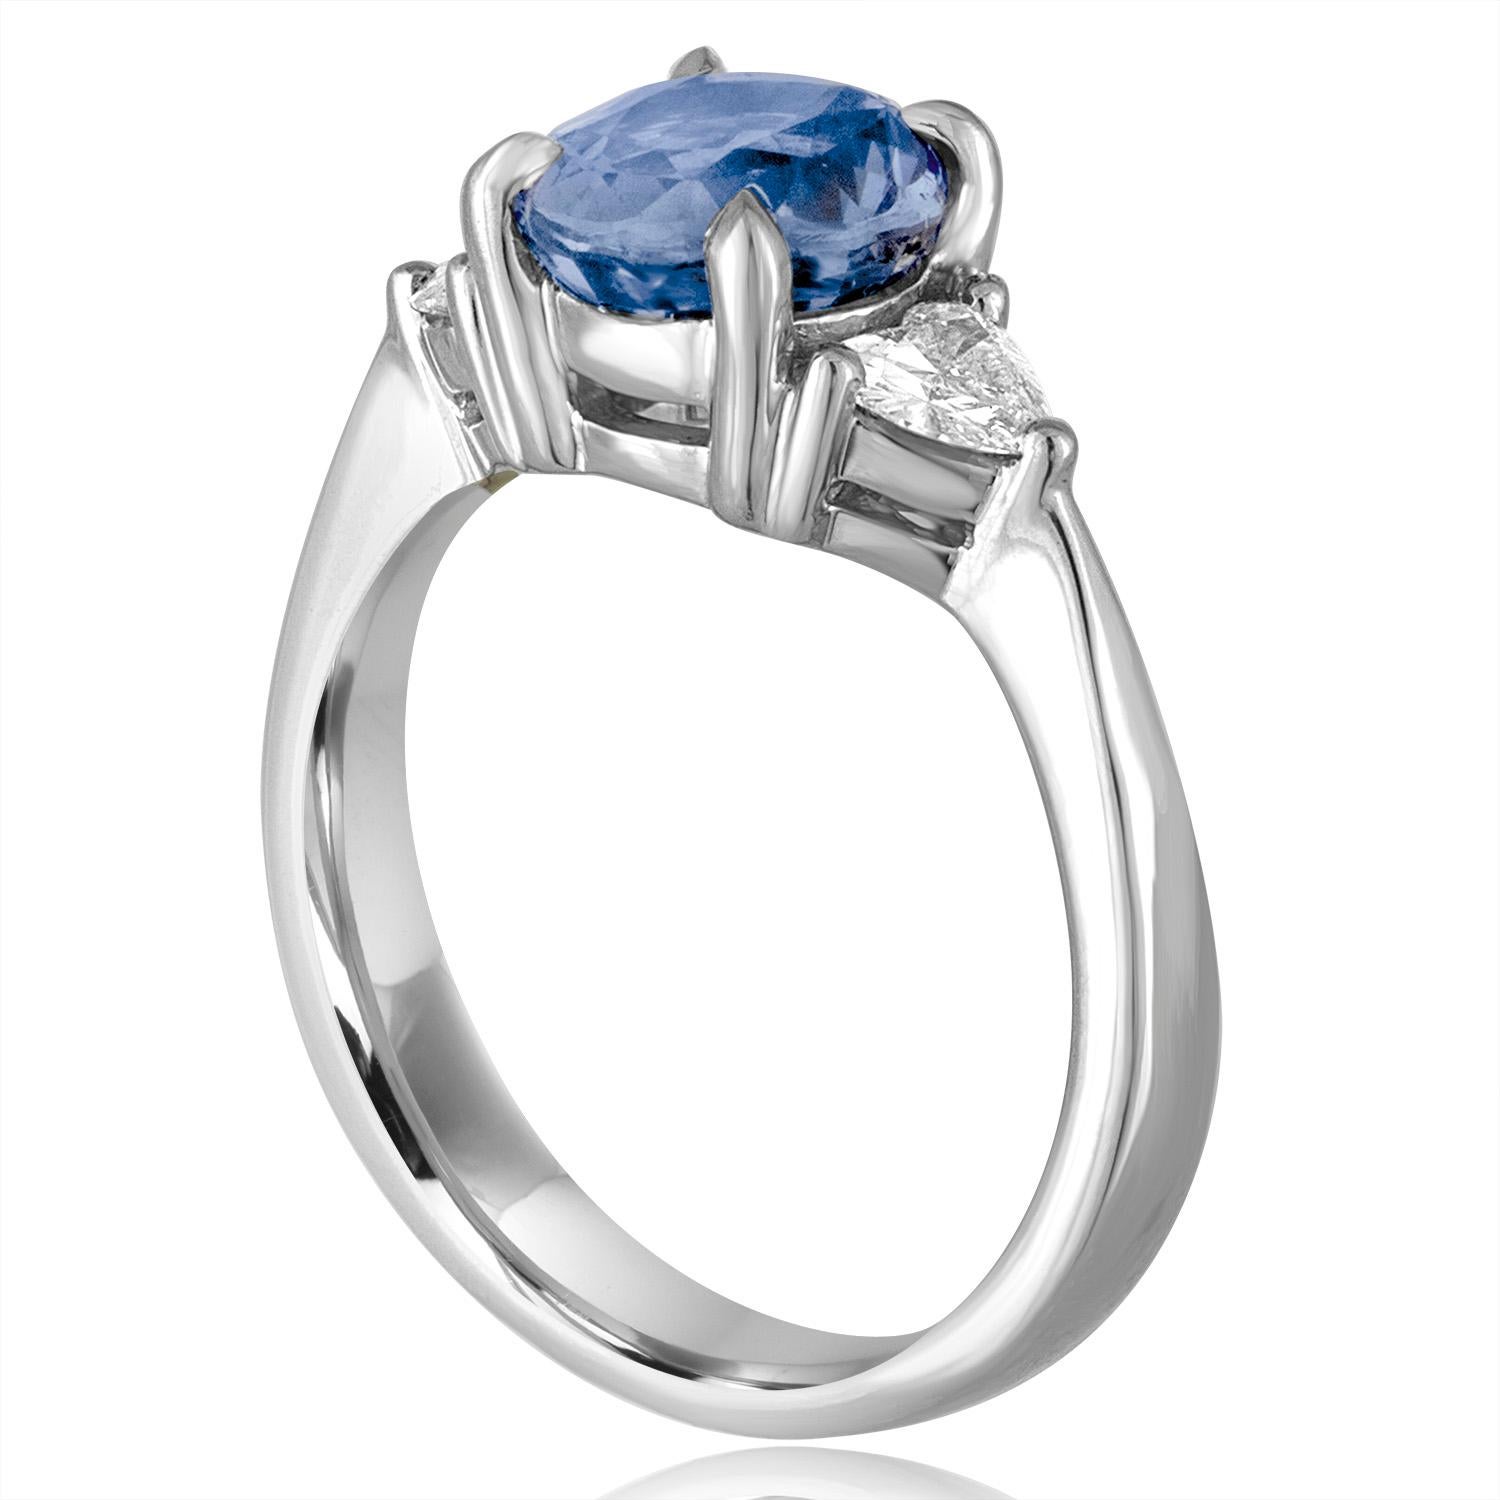 Beautifully Classic Three-Stone Ring
The ring is 18K White Gold
There 0.40 Carats in Diamonds G/H SI1/SI2.
The center stone is an oval 2.44 Carat Blue Sapphire
The Sapphire is NO HEAT and is certified by AGL.
The ring is IGI certified.
The ring is a